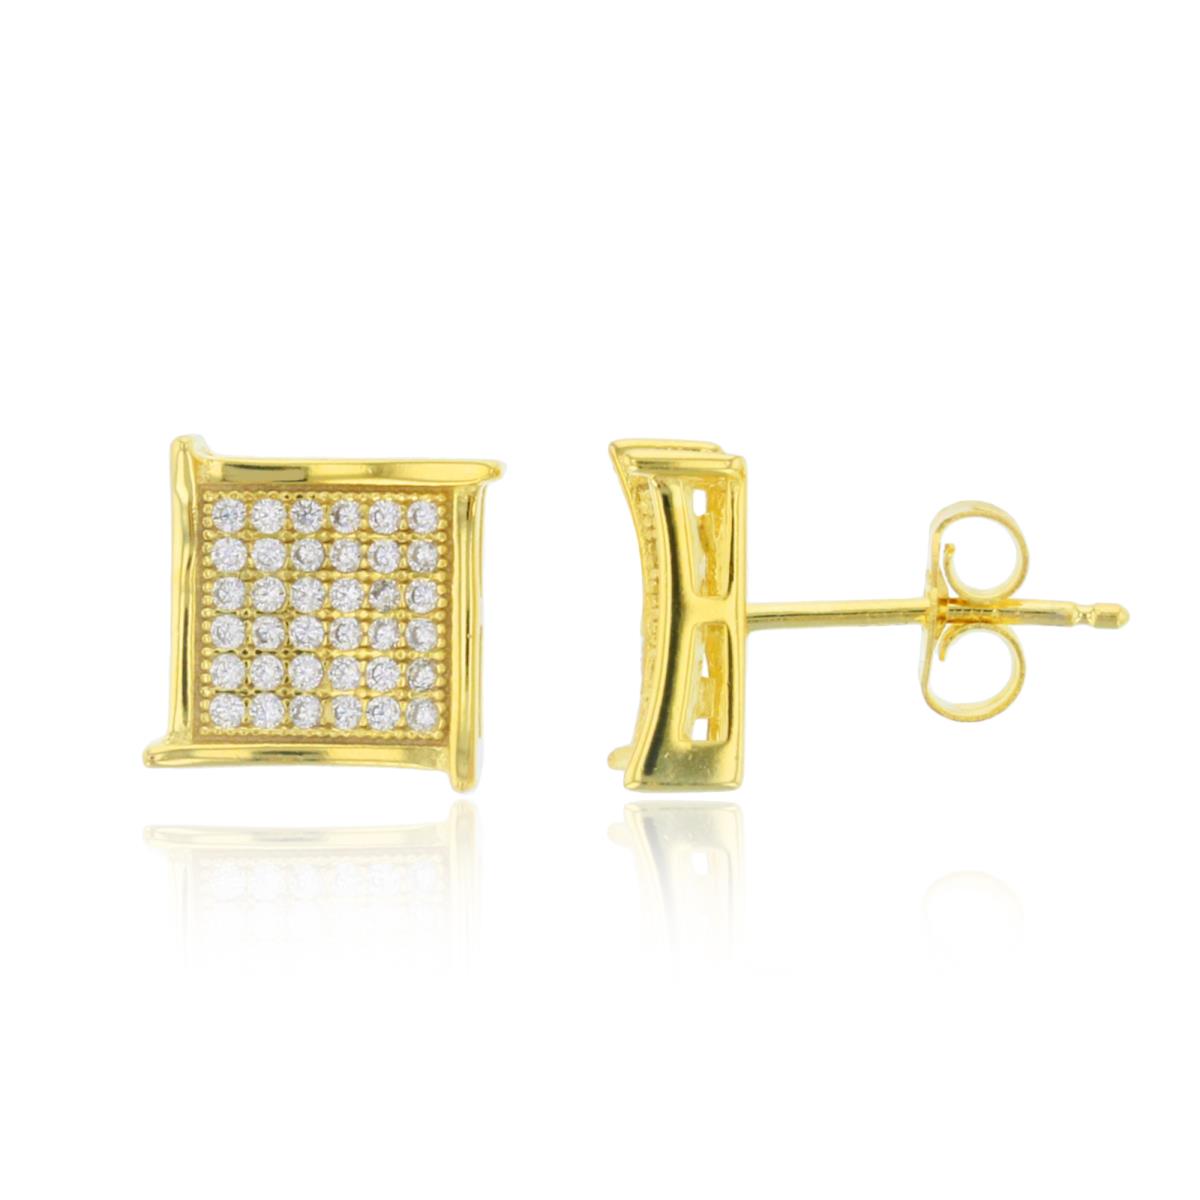 Sterling Silver Yellow 6X6mm Fancy Square Micropave Stud Earring